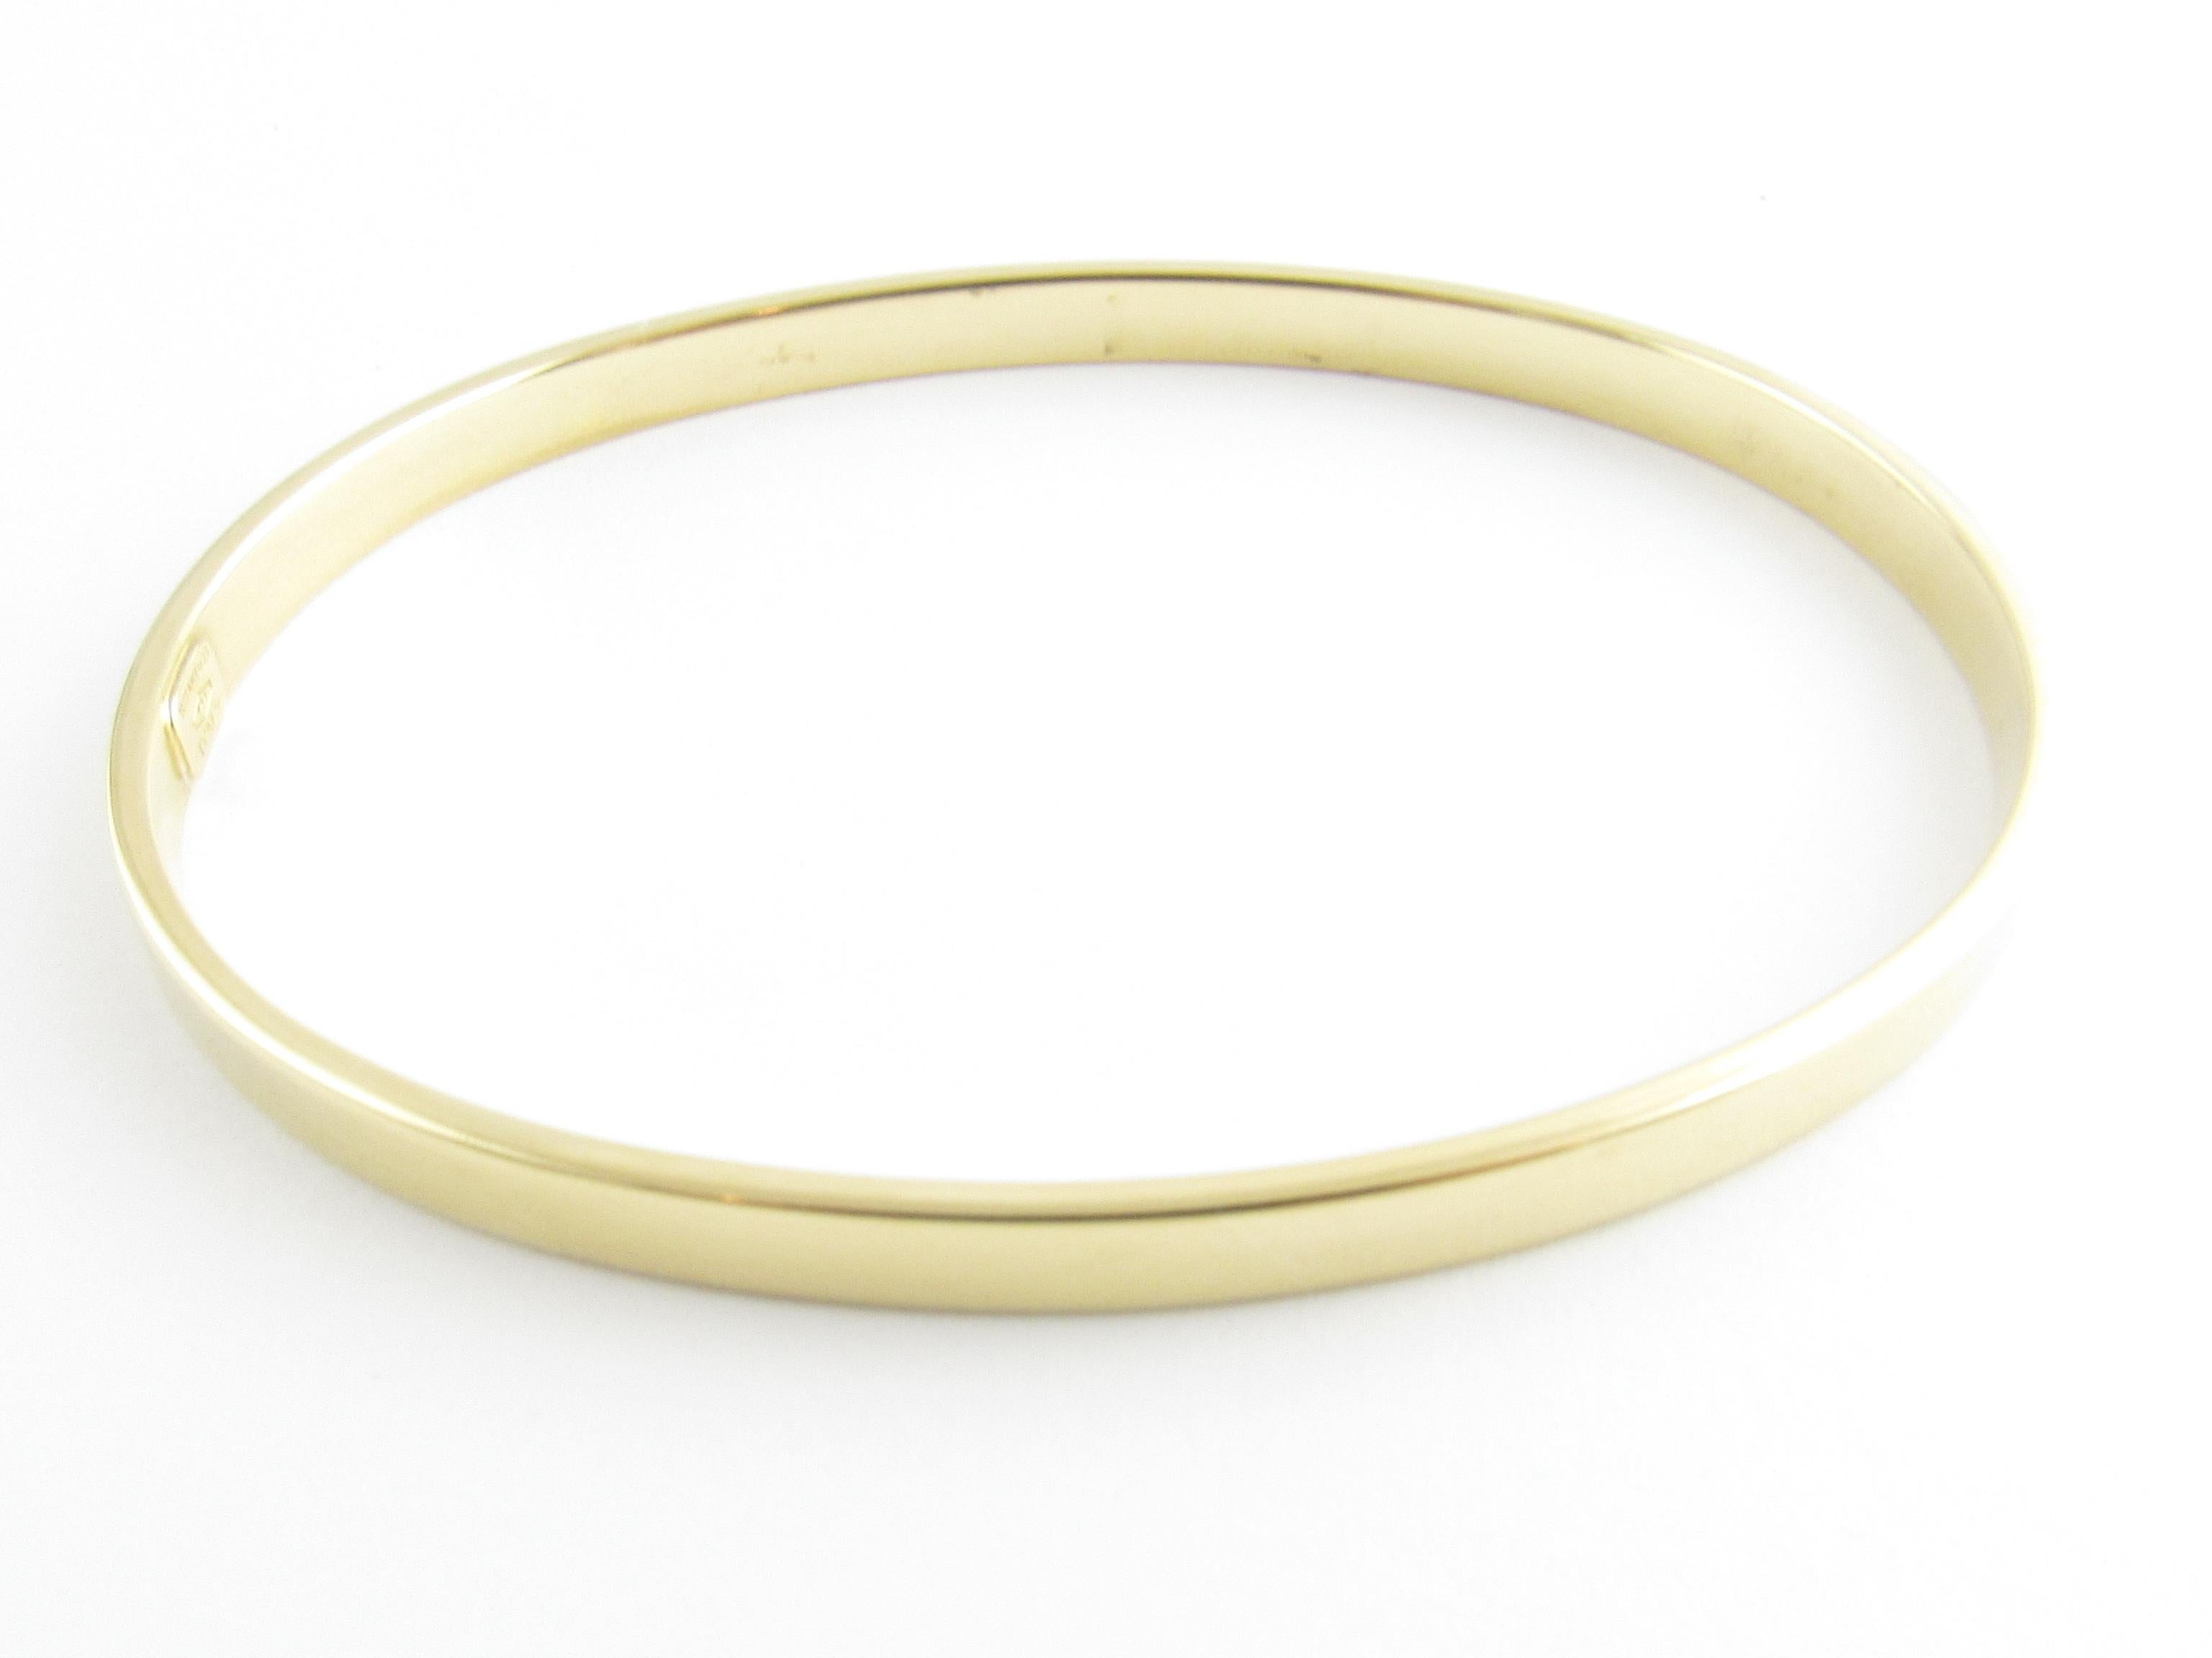 Vintage Tiffany & Co. 18K Yellow Gold Oval Bangle Bracelet

This authentic Tiffany & Co. bangle bracelet is approx. 2 5/8